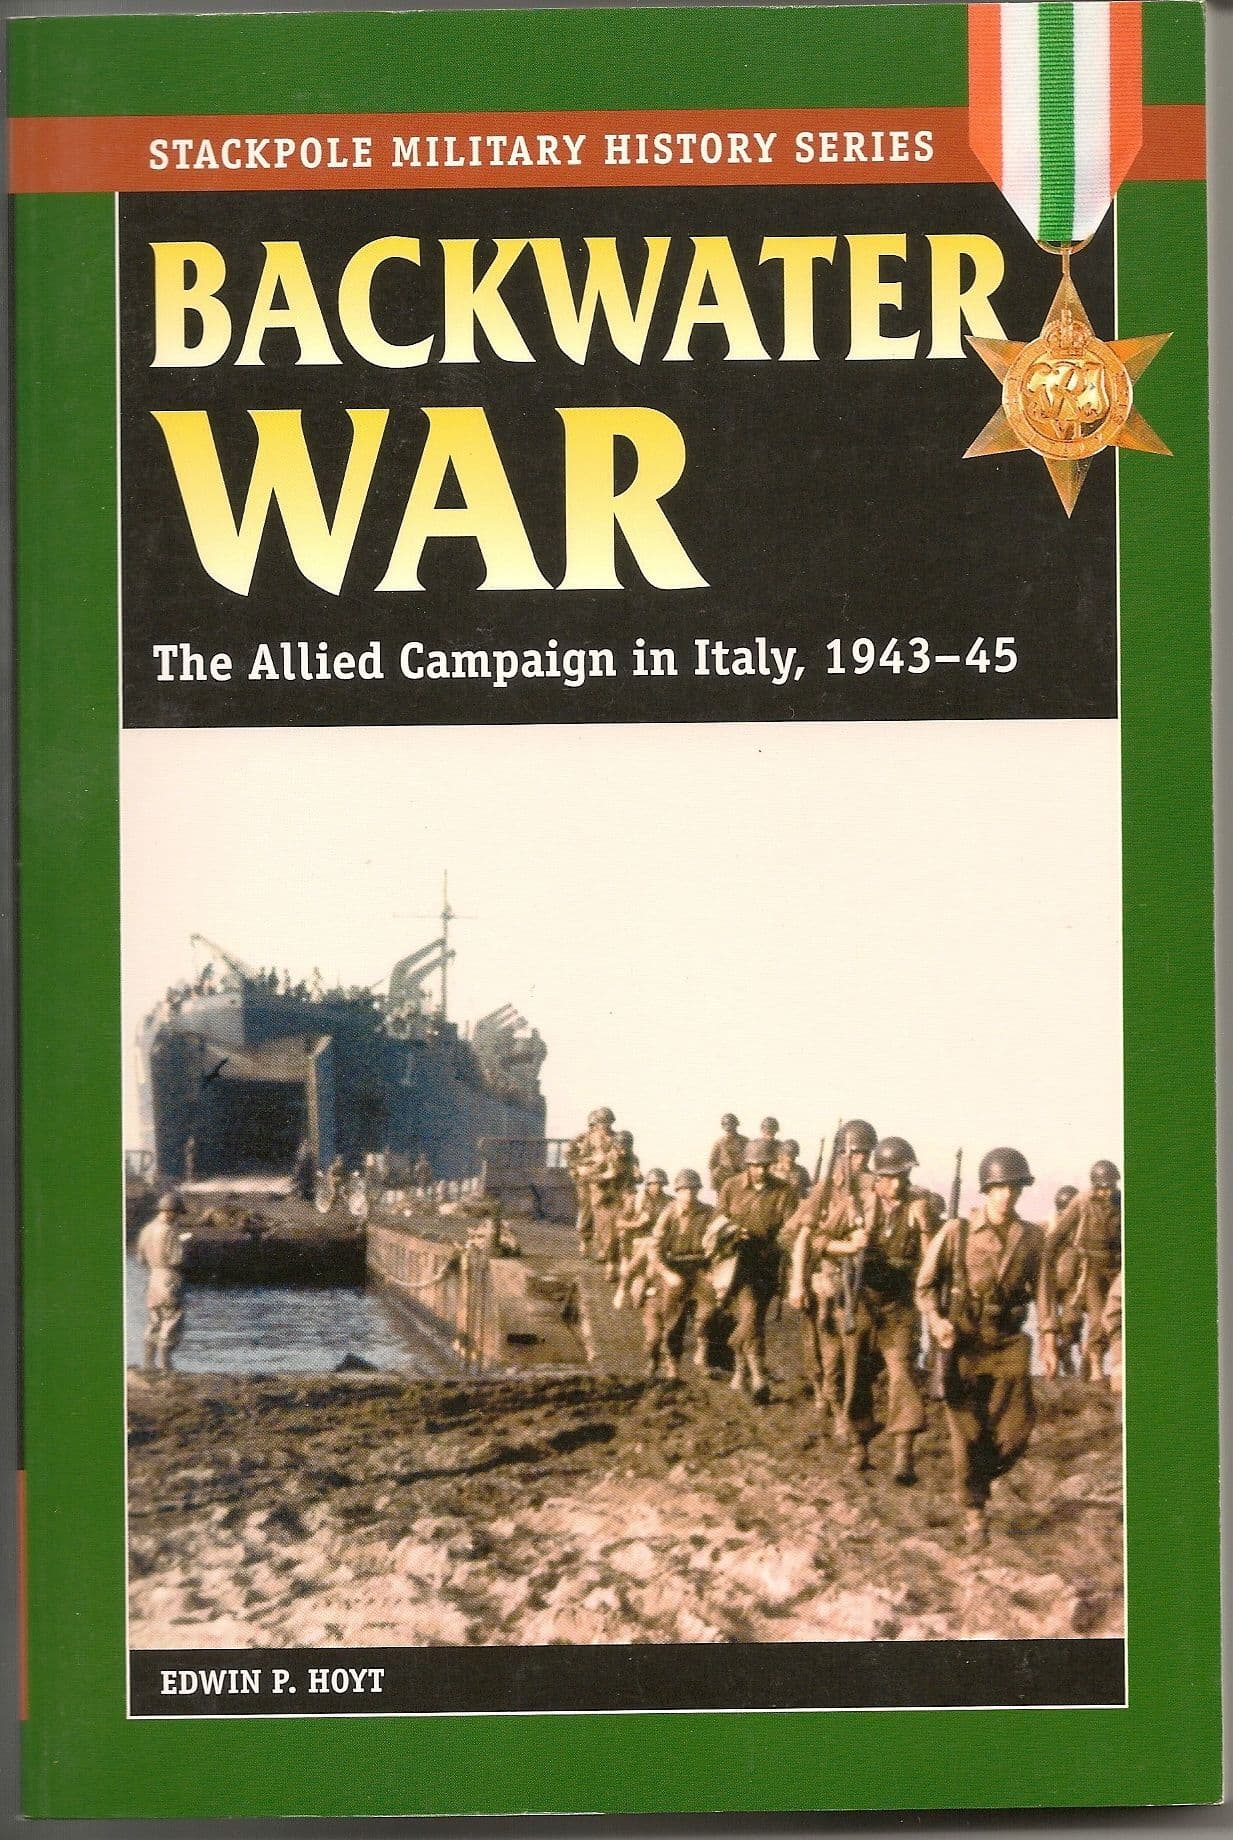 Stackpole: Backwater War, The Allied Campaign in Italy, 1943-45